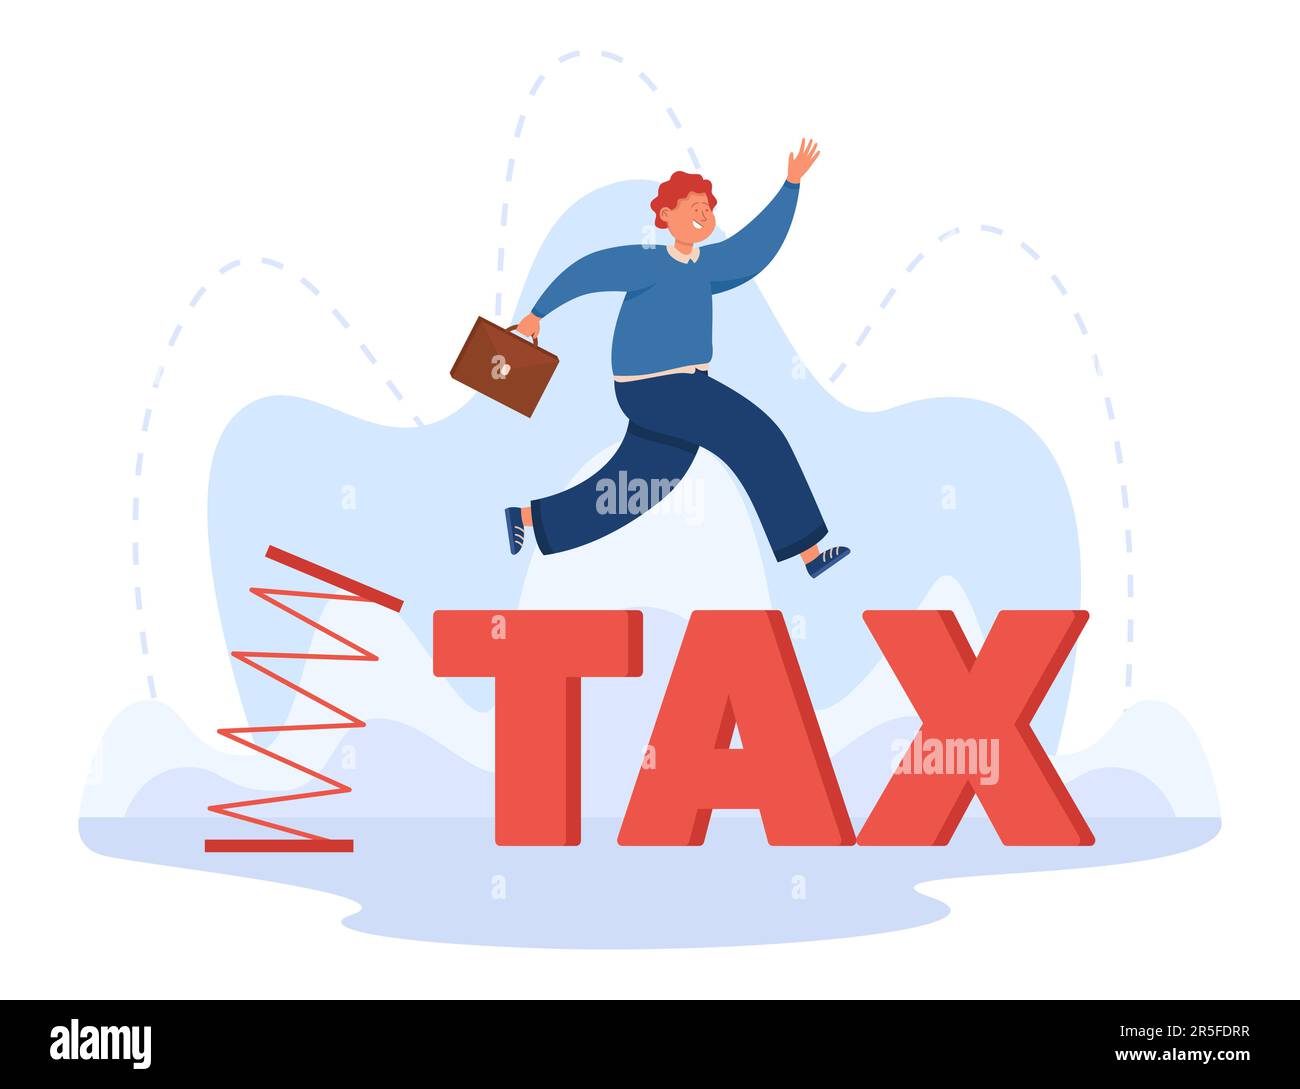 Businessman jumping from flexible spring Stock Vector